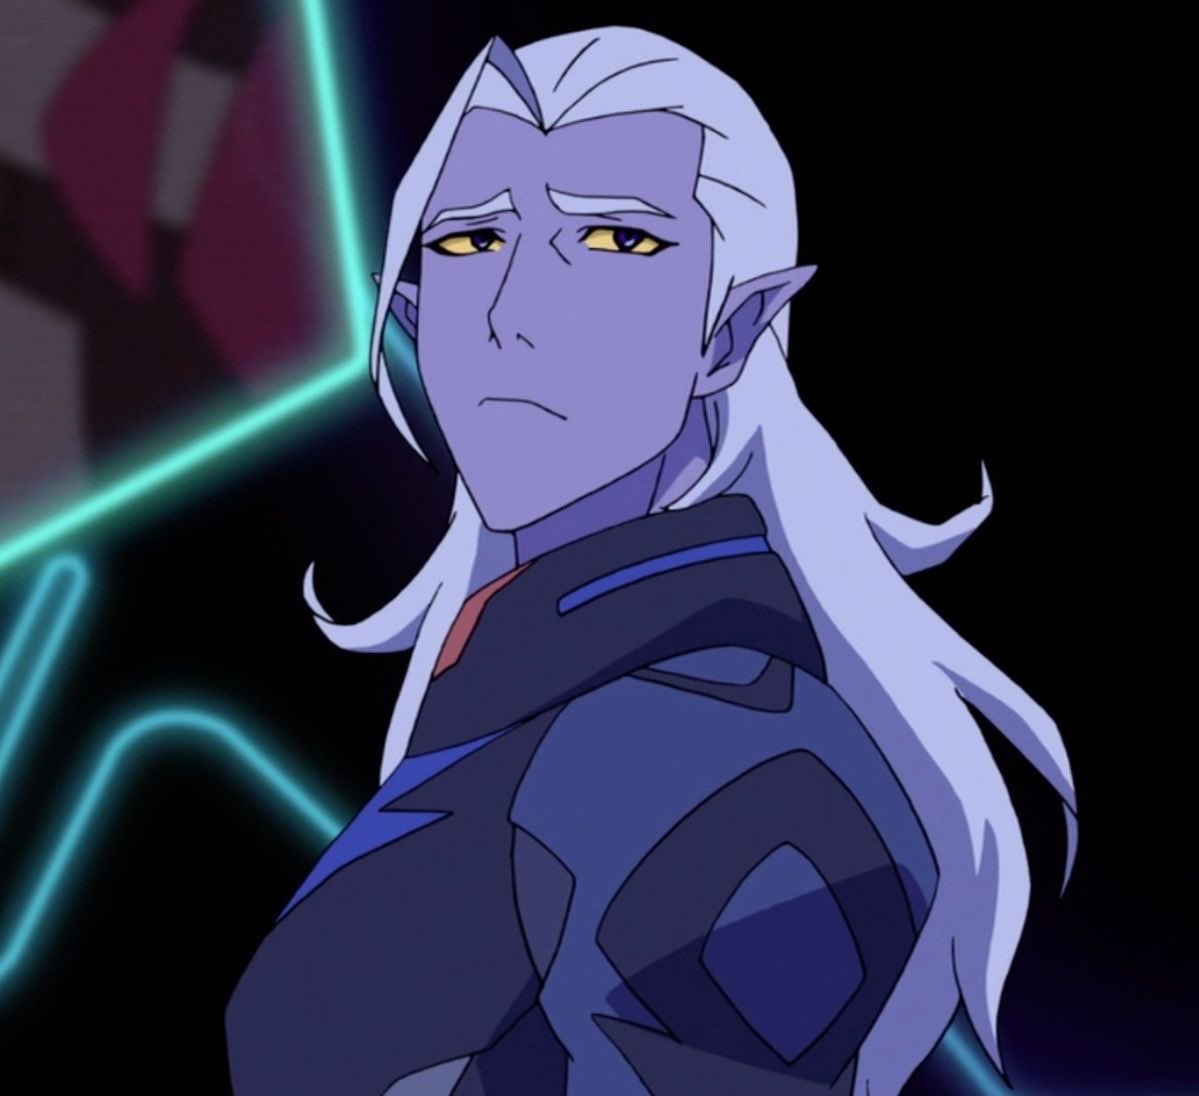 Lotor from “Voltron: Legendary Defender.” The writers did him so dirty and I’ll never forgive them for that!😡😤